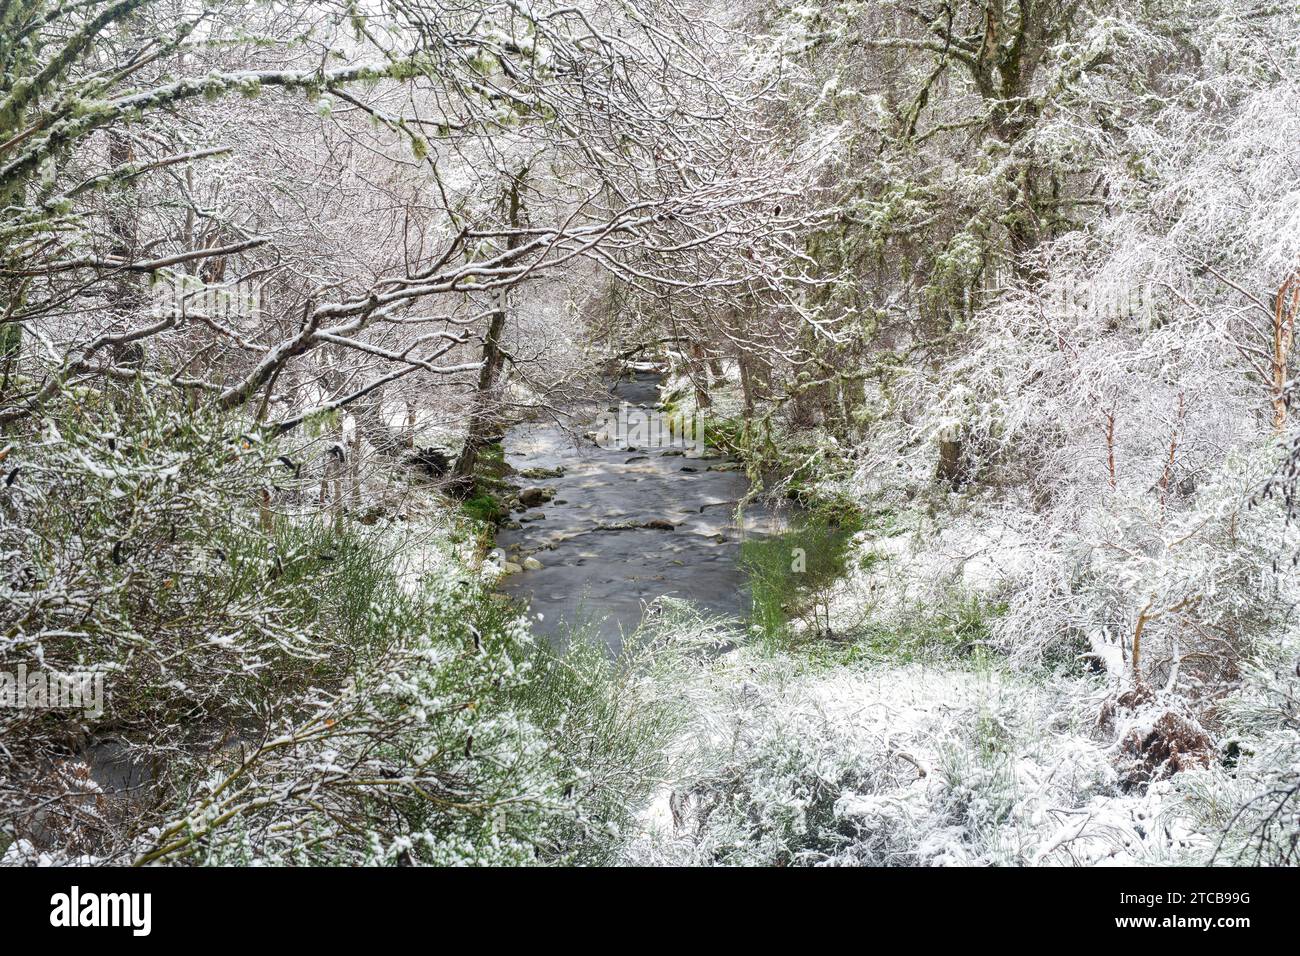 The tributary river Allt a Gheallaidh in the snow. Speyside, Morayshire, Scotland Stock Photo